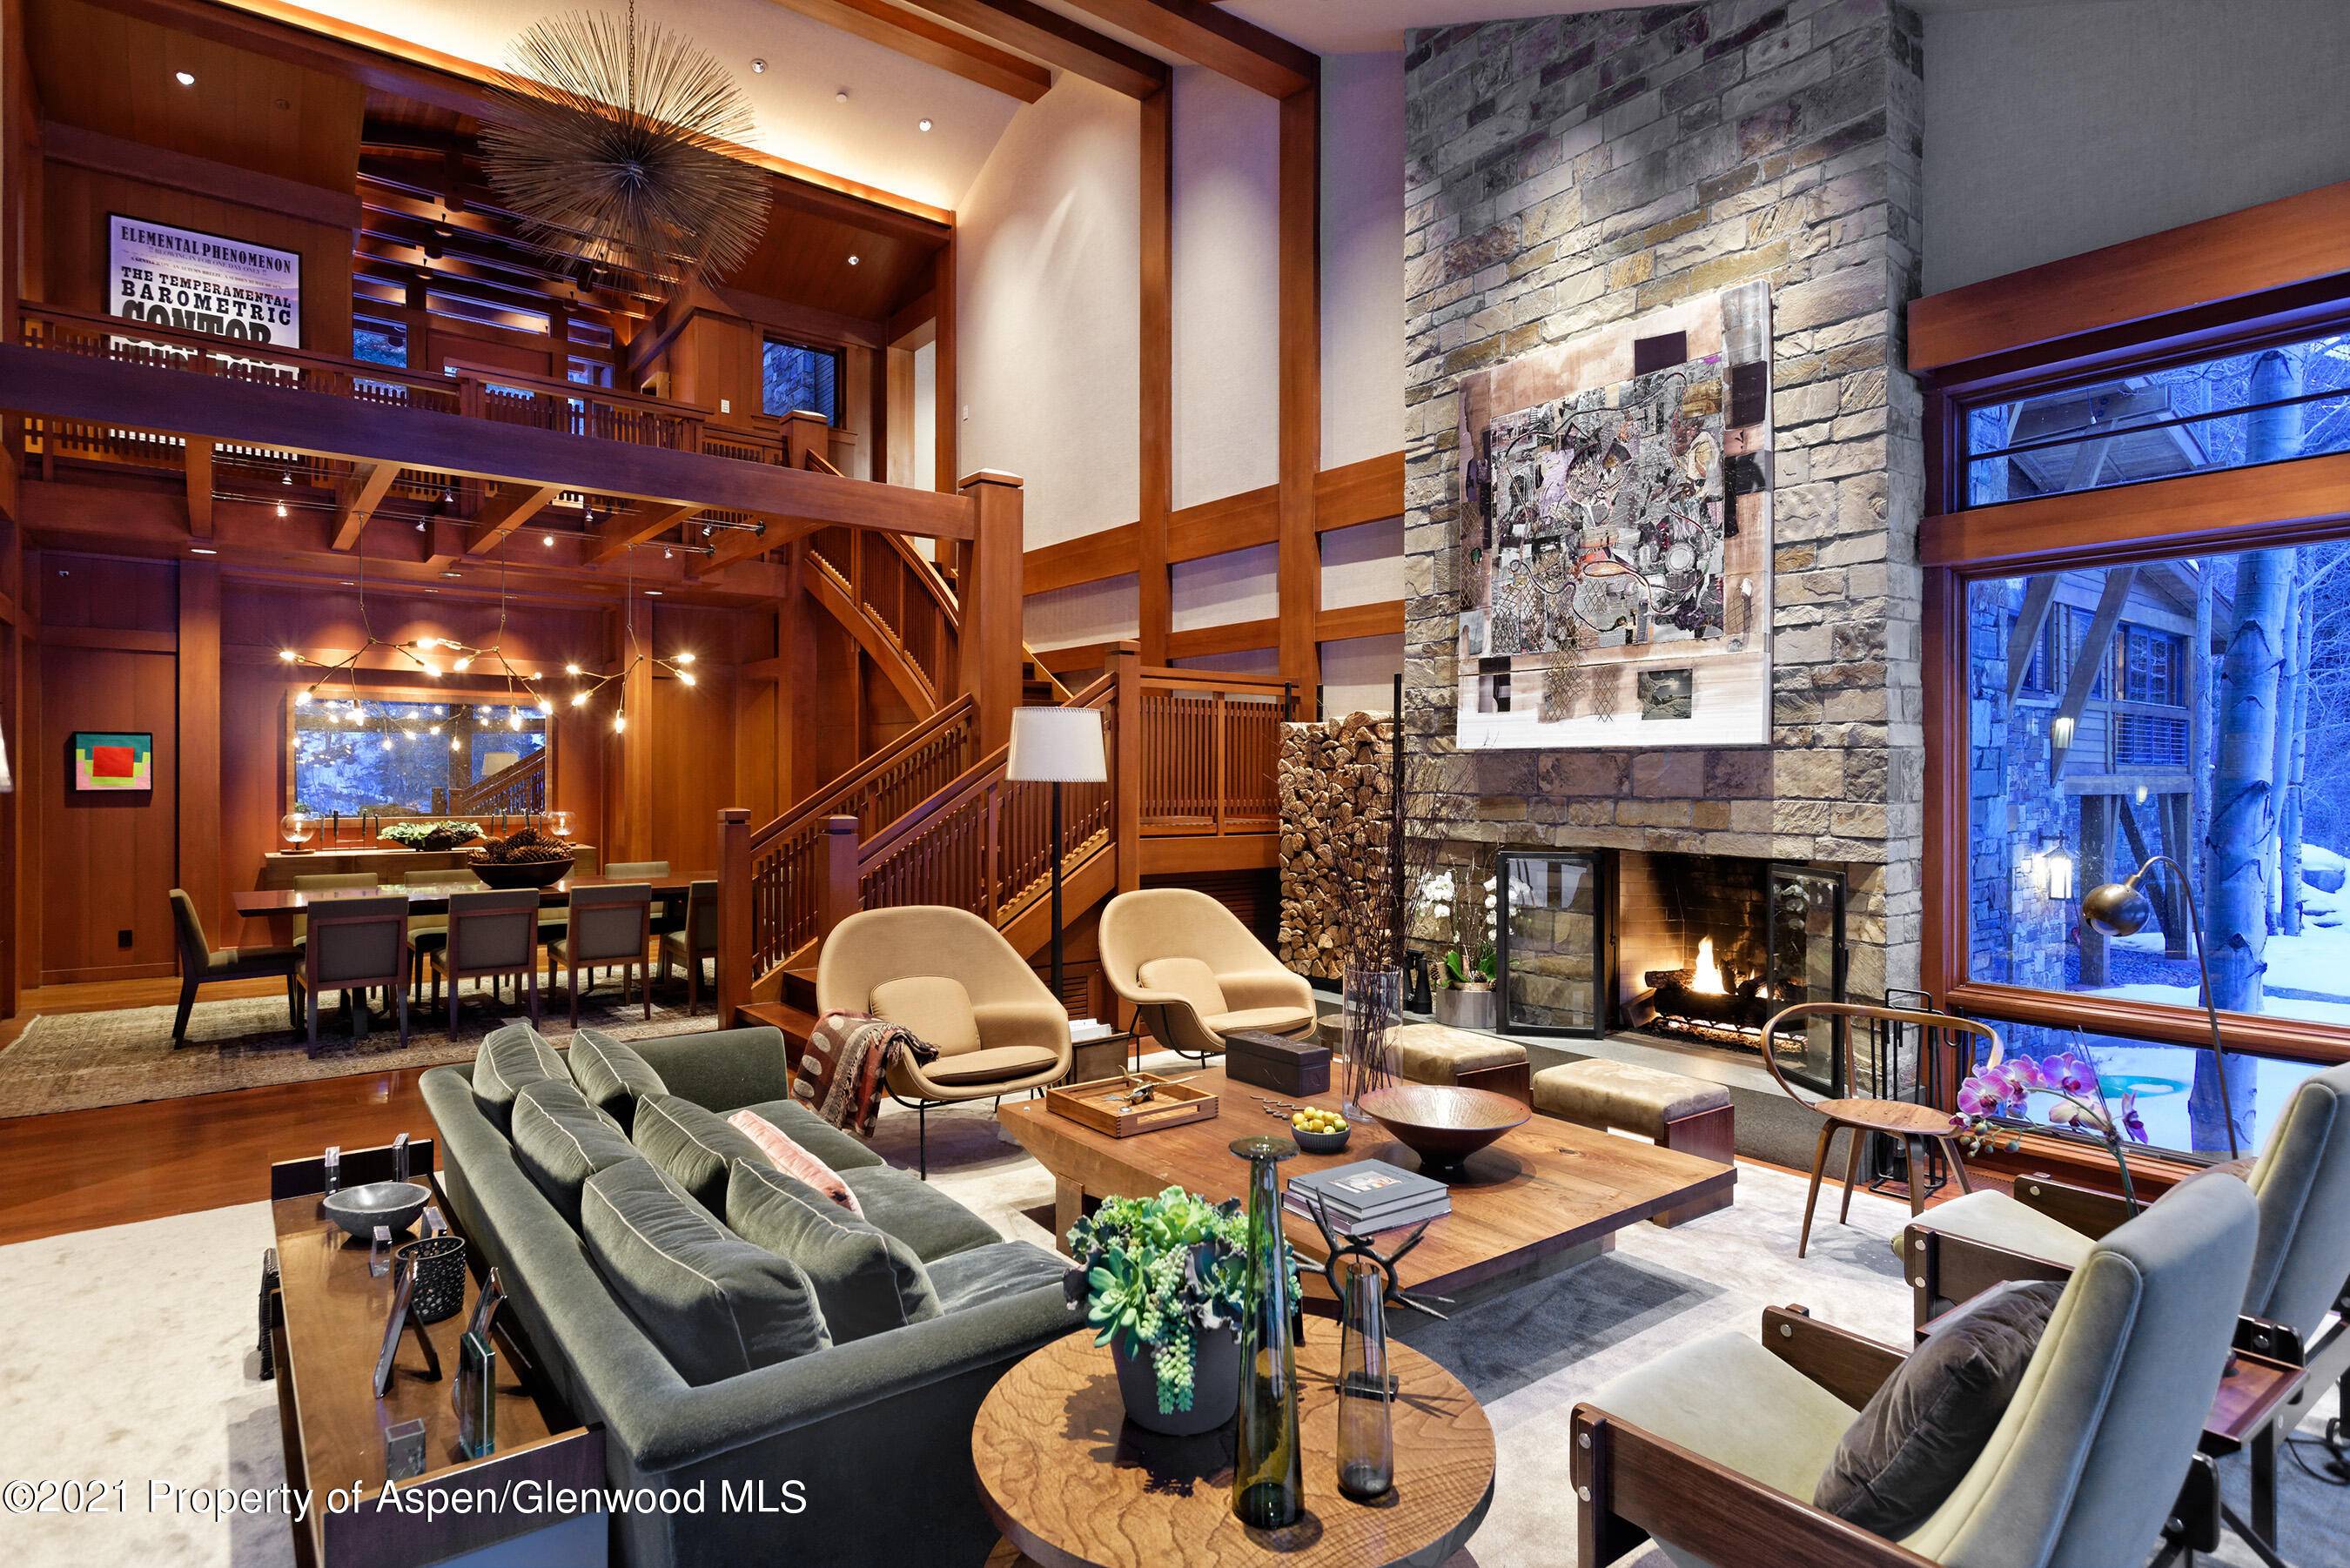 An awe inspiring private river front Aspen Estate that has it all.